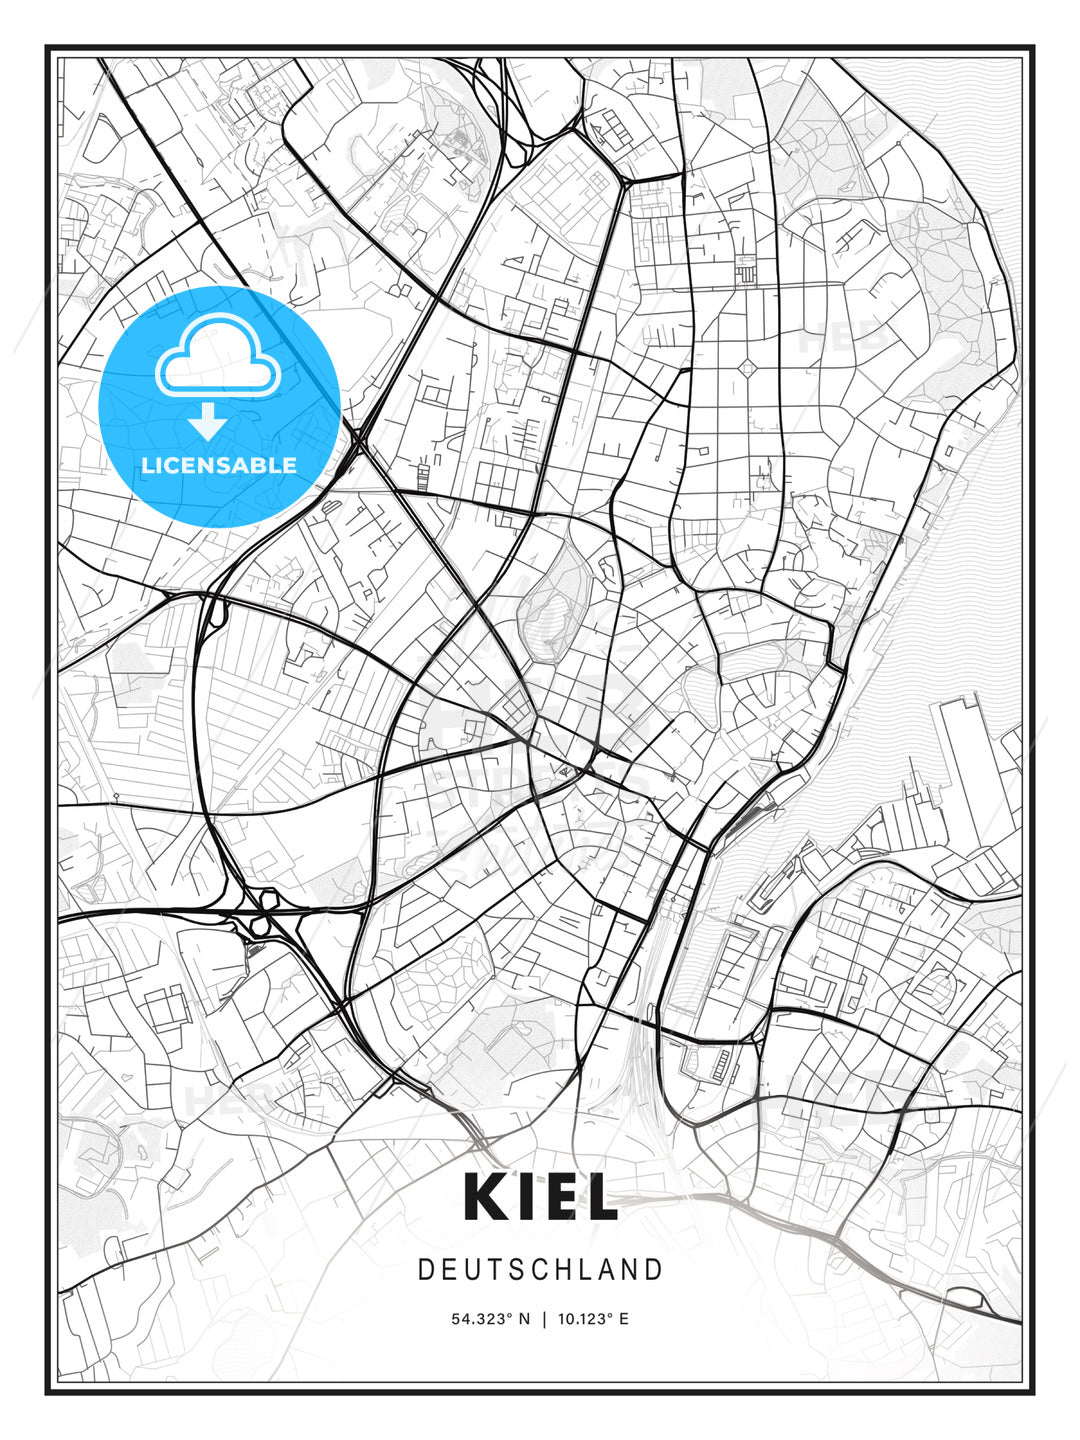 Kiel, Germany, Modern Print Template in Various Formats - HEBSTREITS Sketches